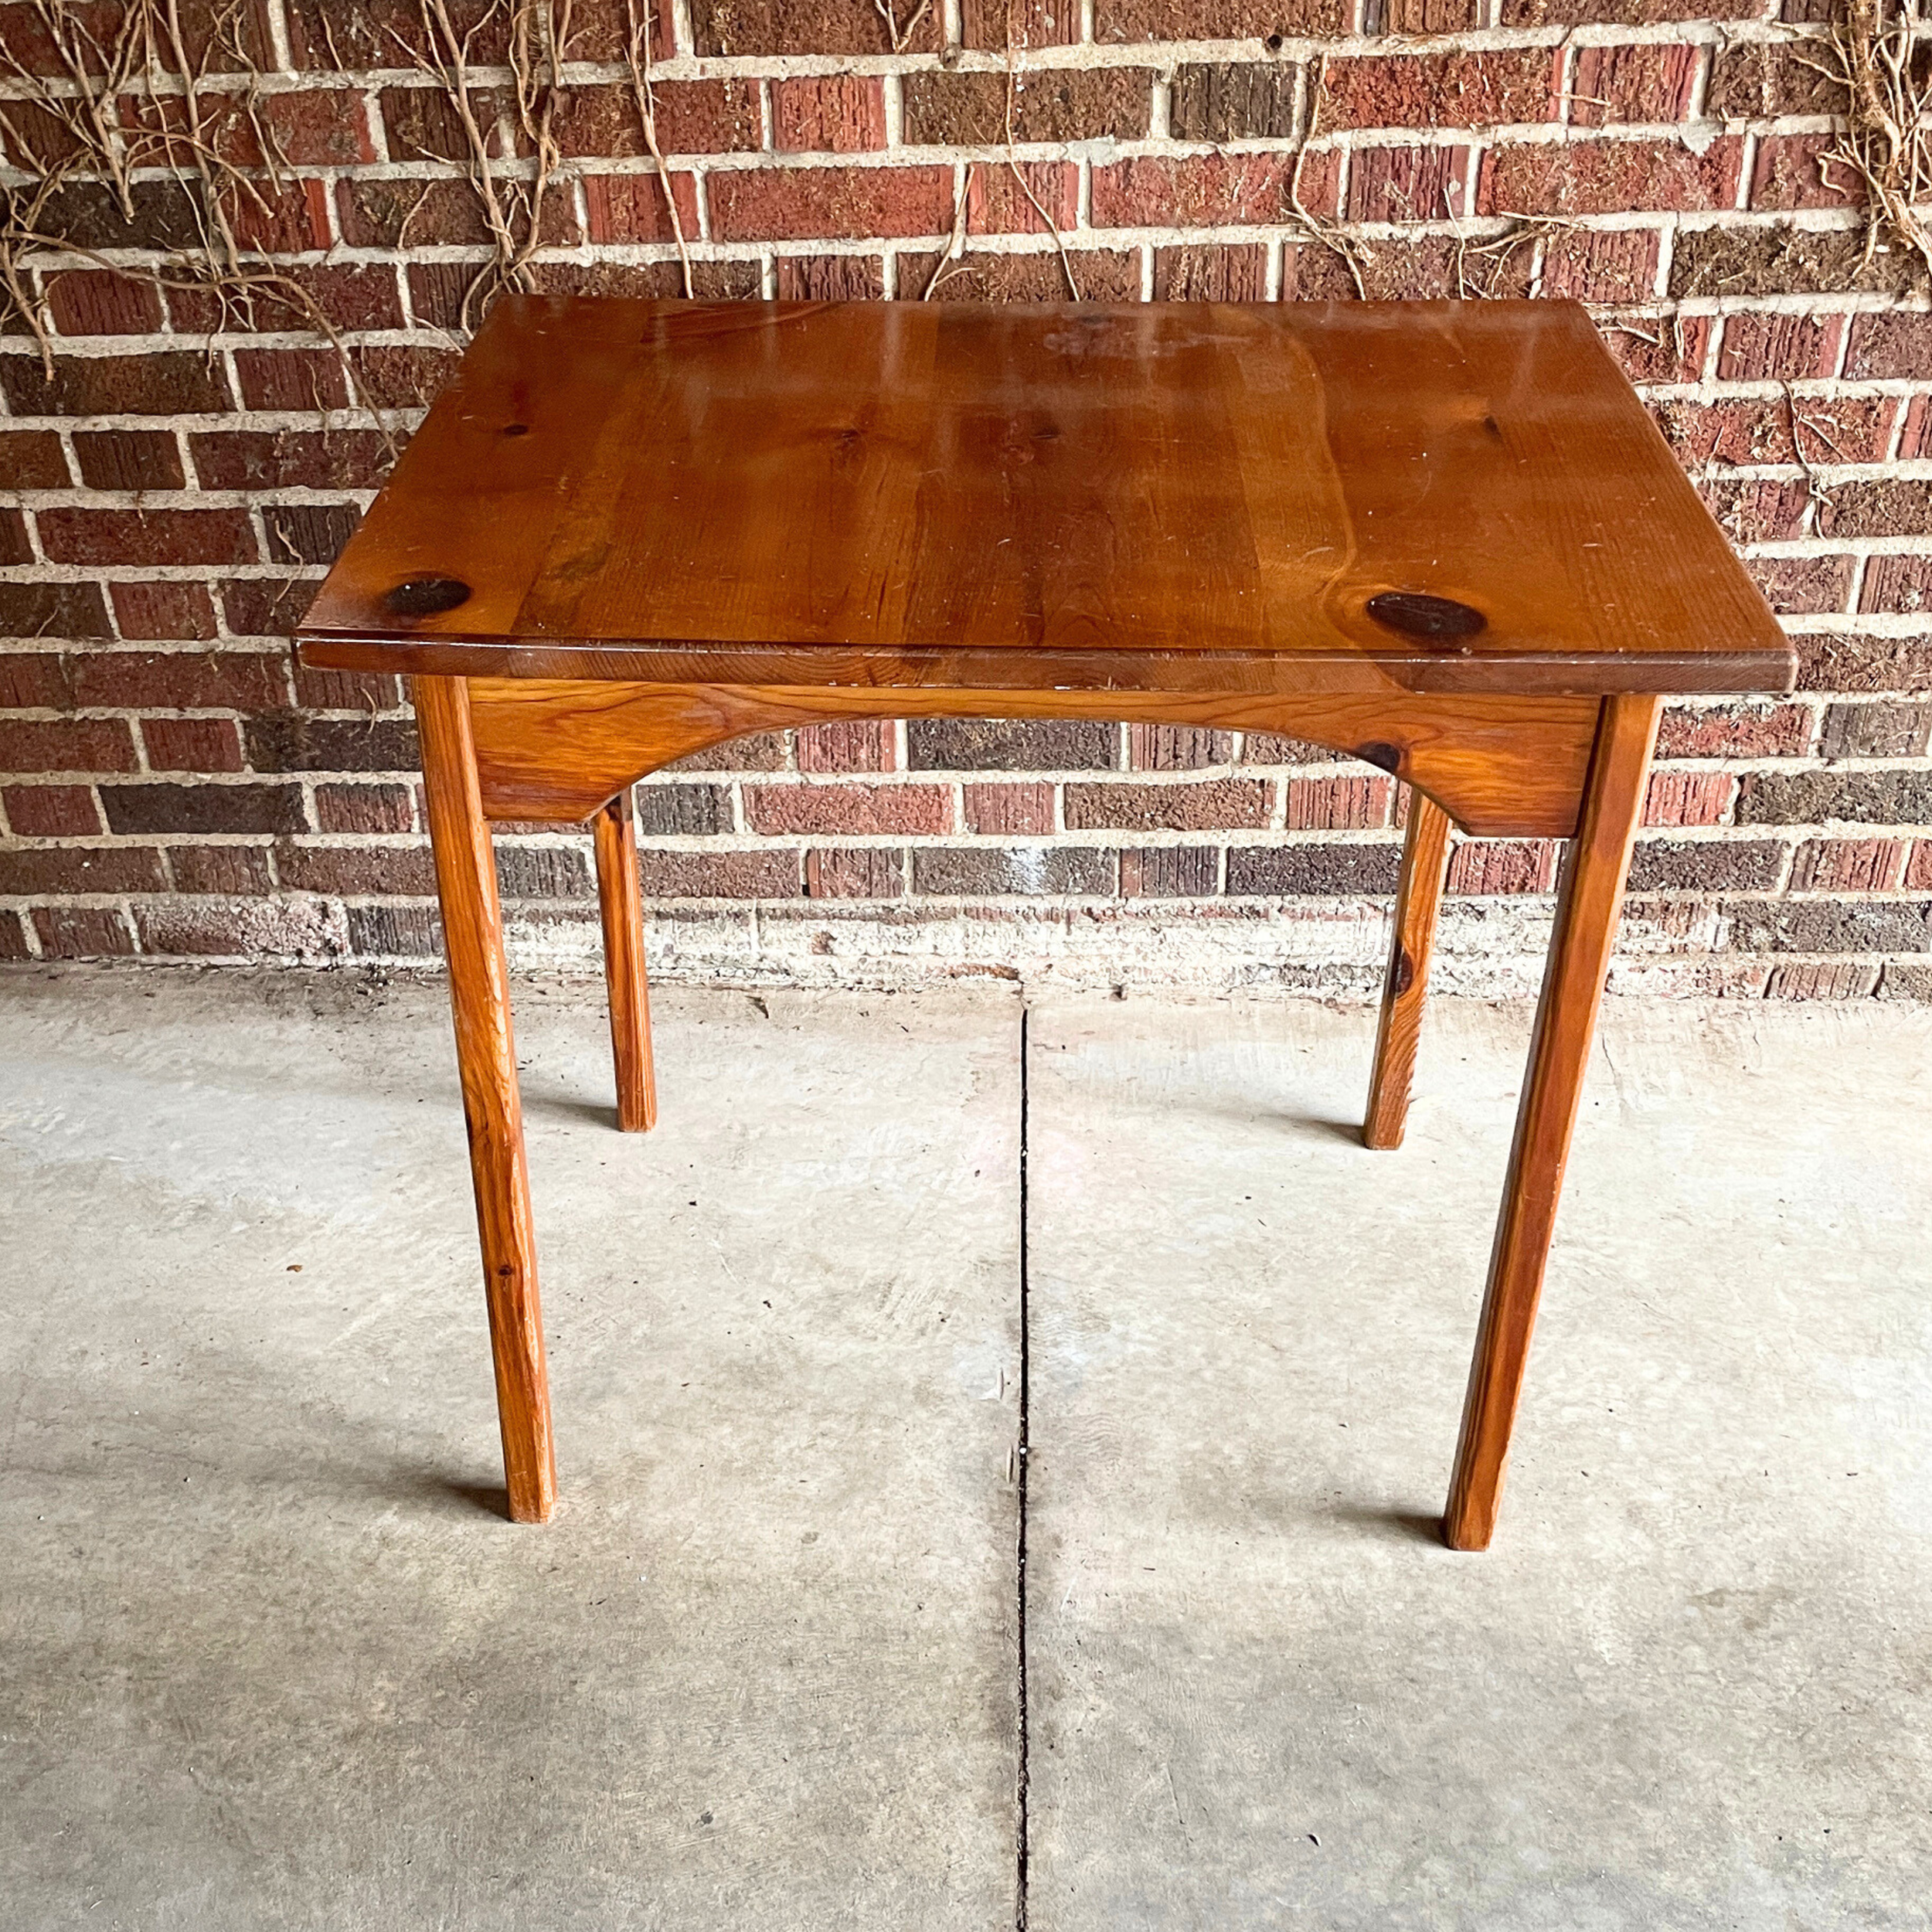 Tall Wood End Table